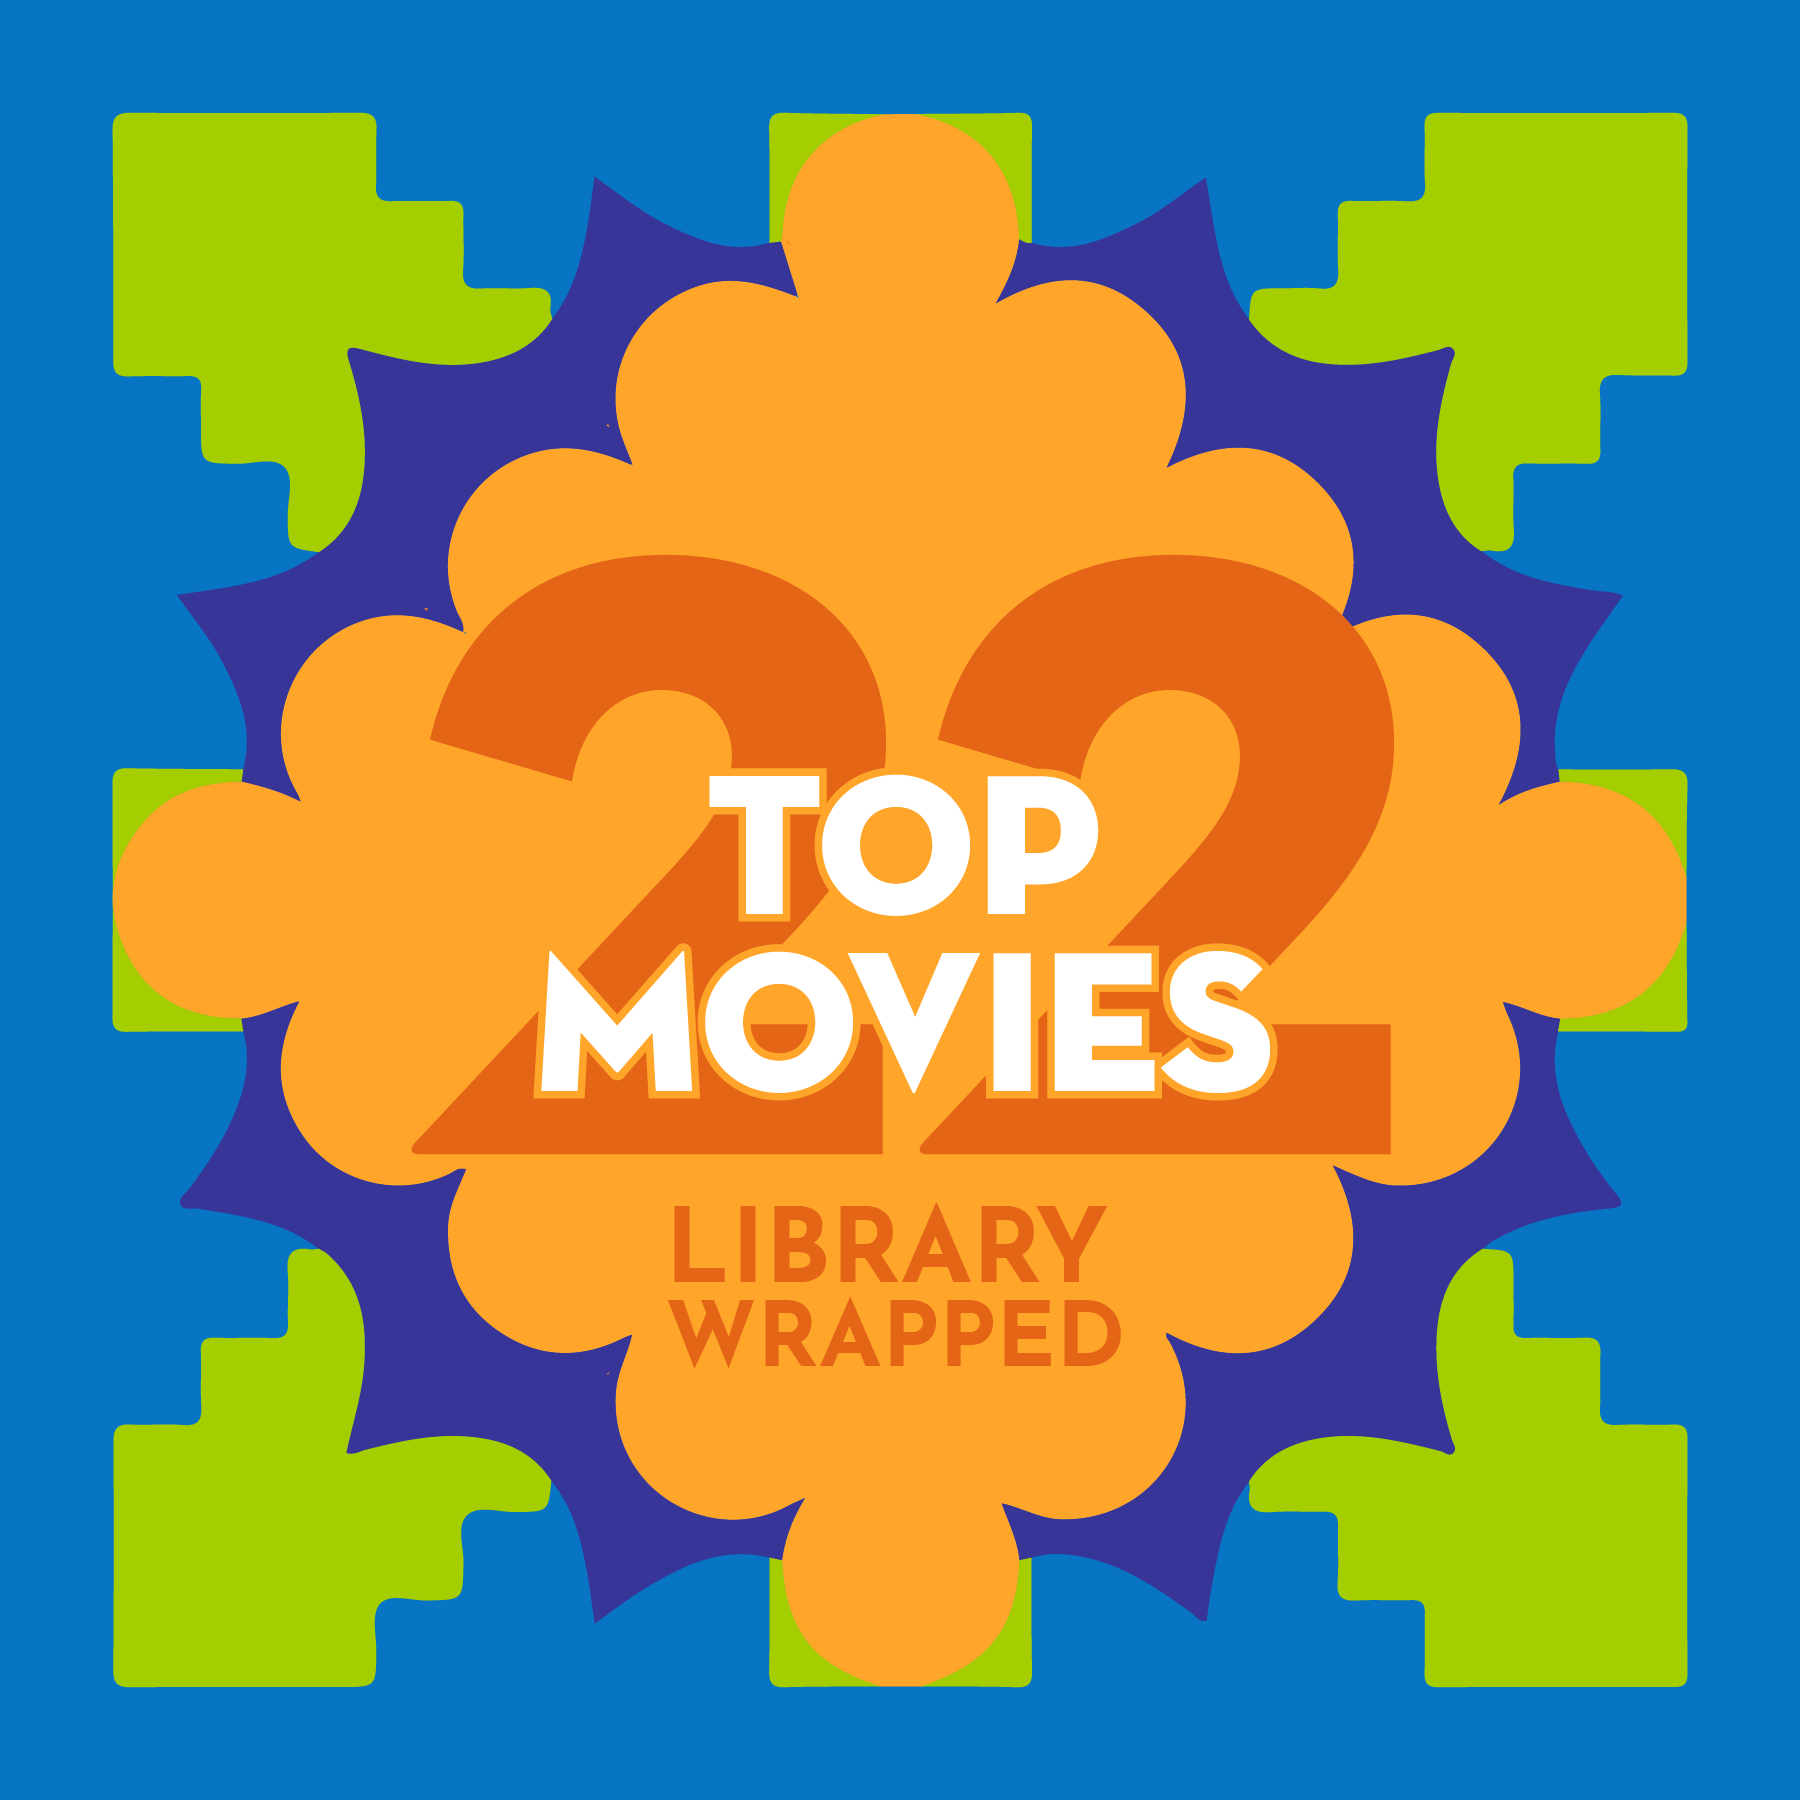 A graphic says 22 Library Wrapped Top Movies over a blue background.